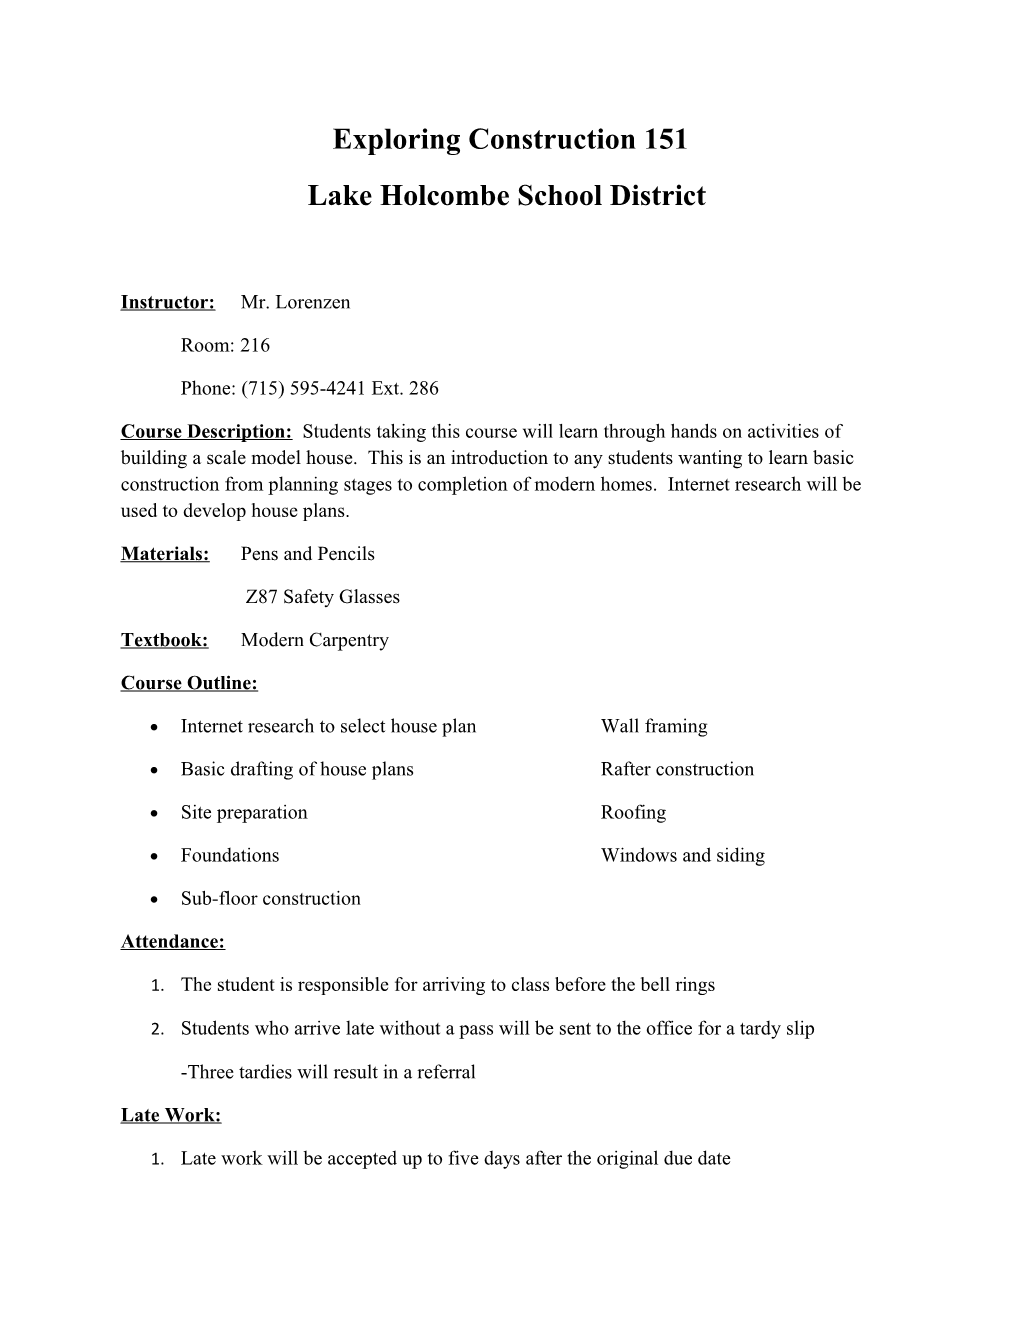 Lake Holcombe School District